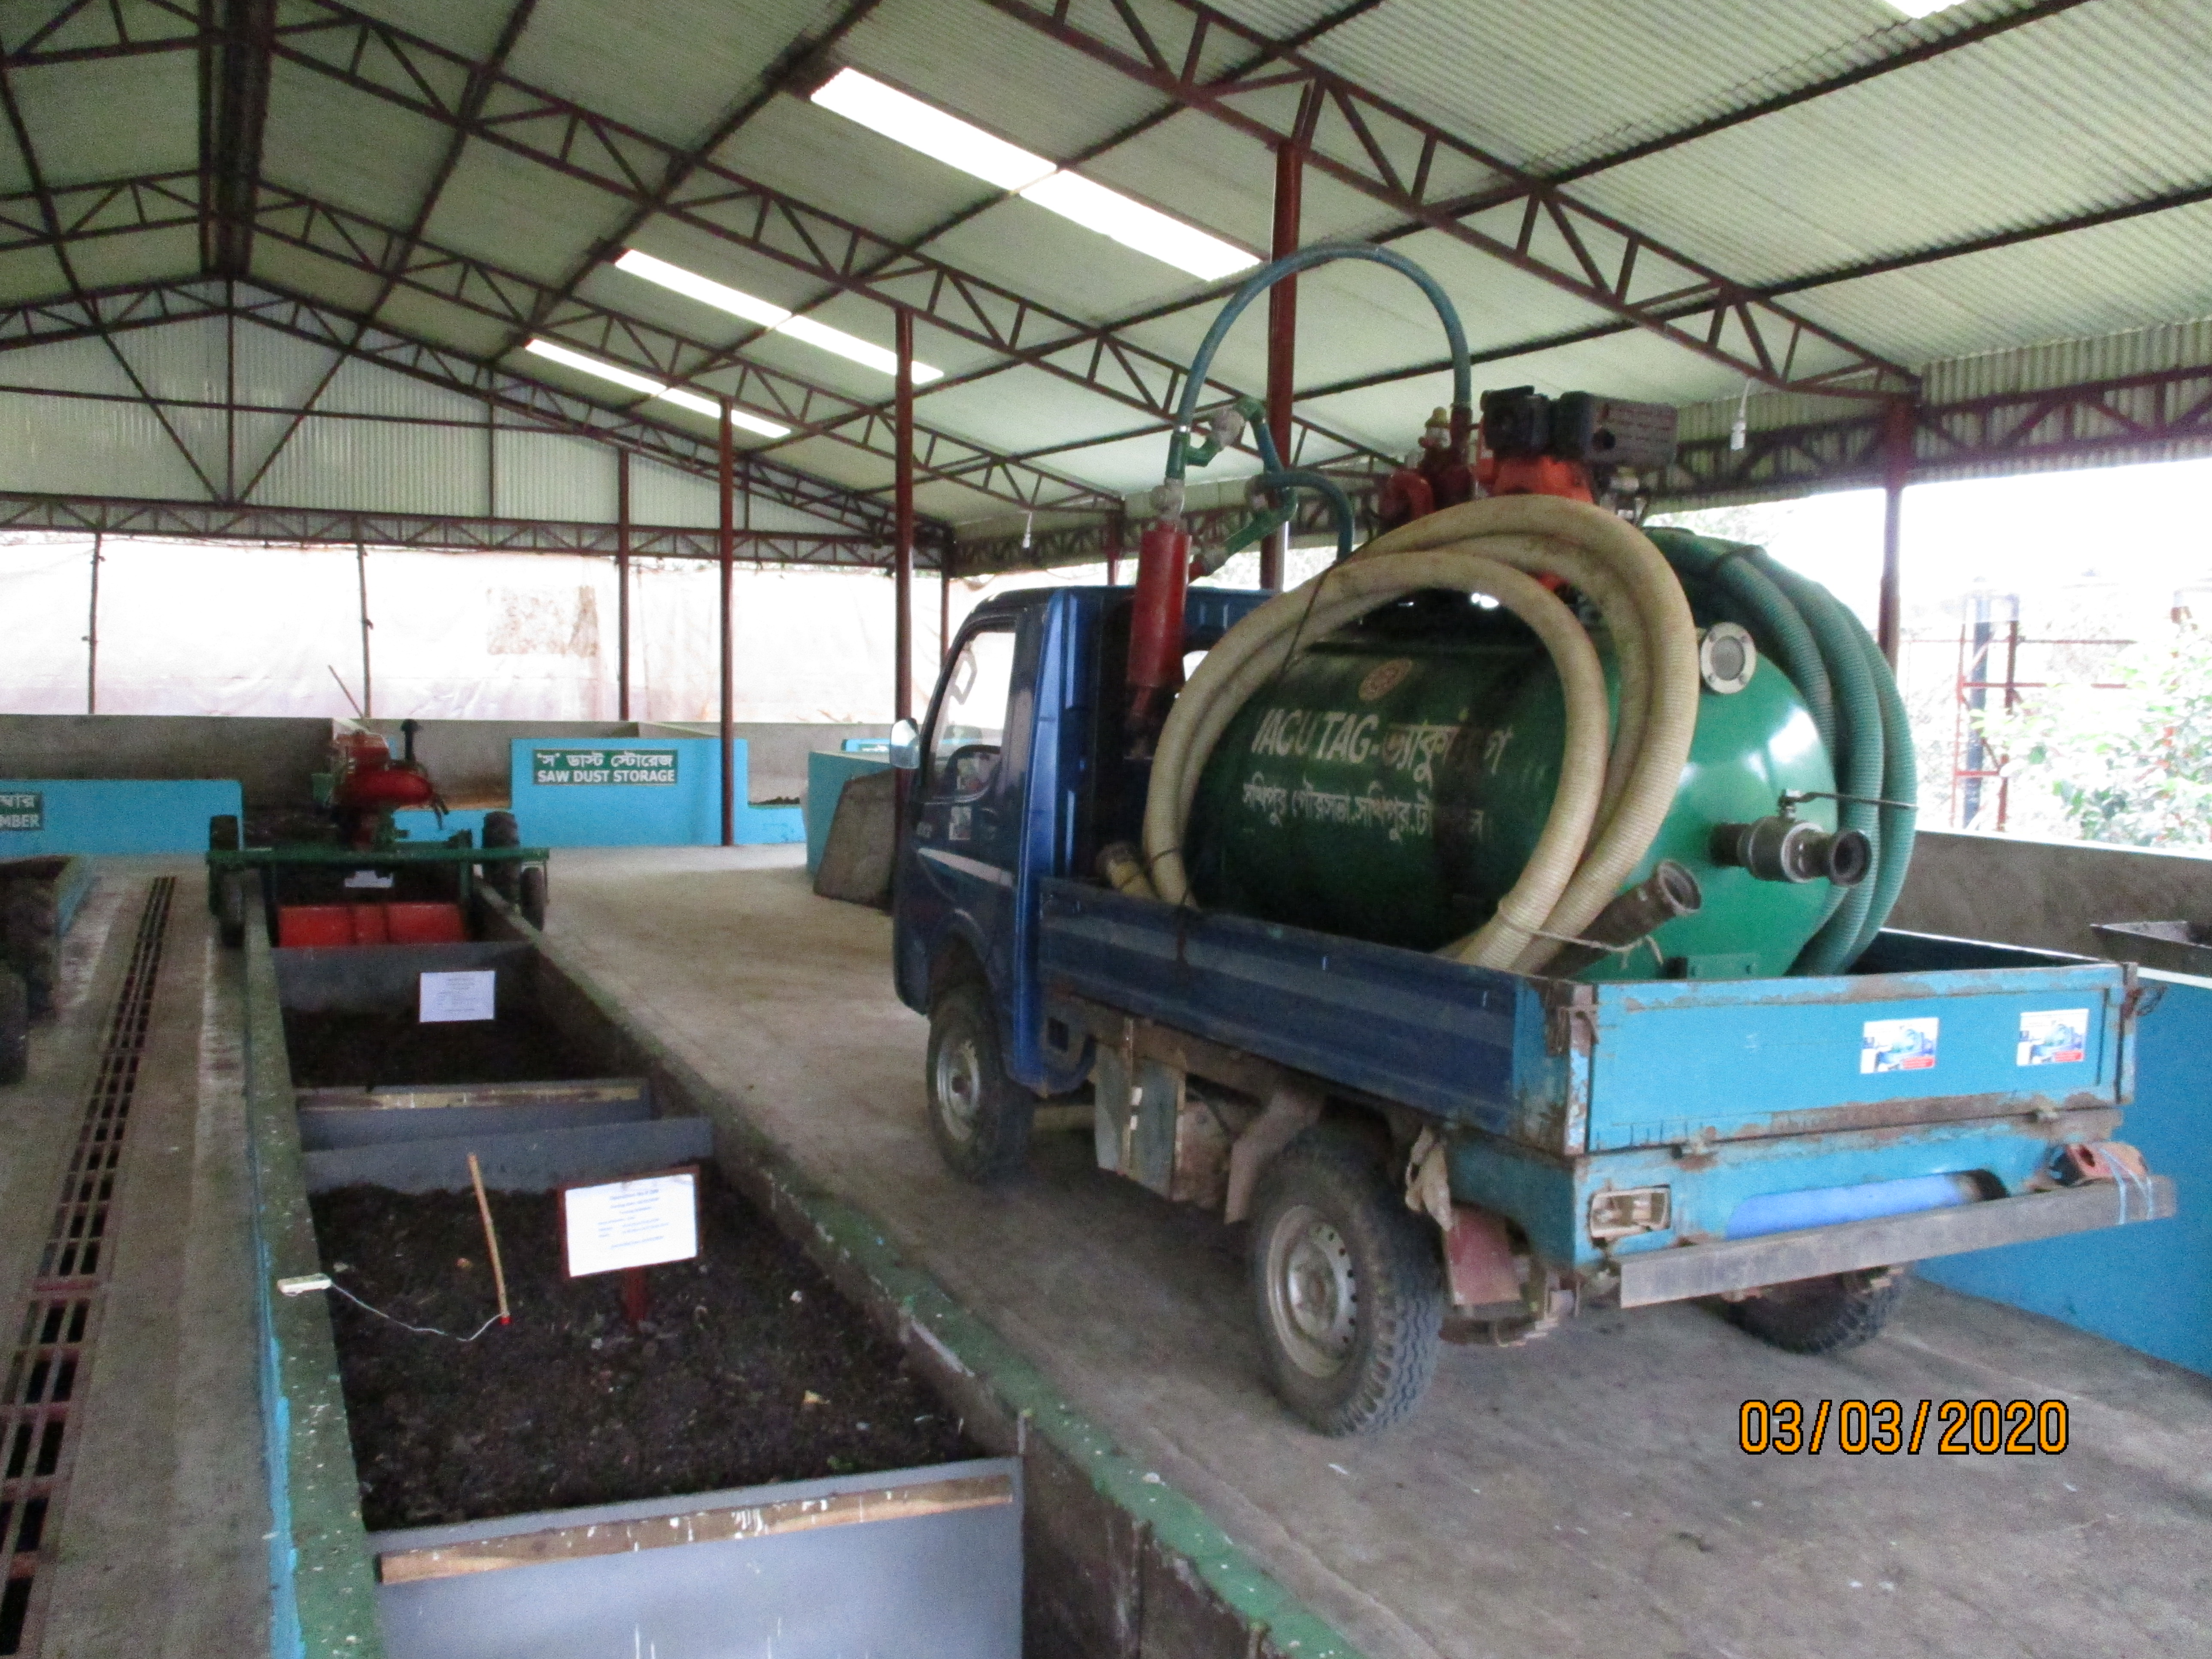 A Mechanical Vacutag Truck in Bangladesh Image credit: Sally Cawood